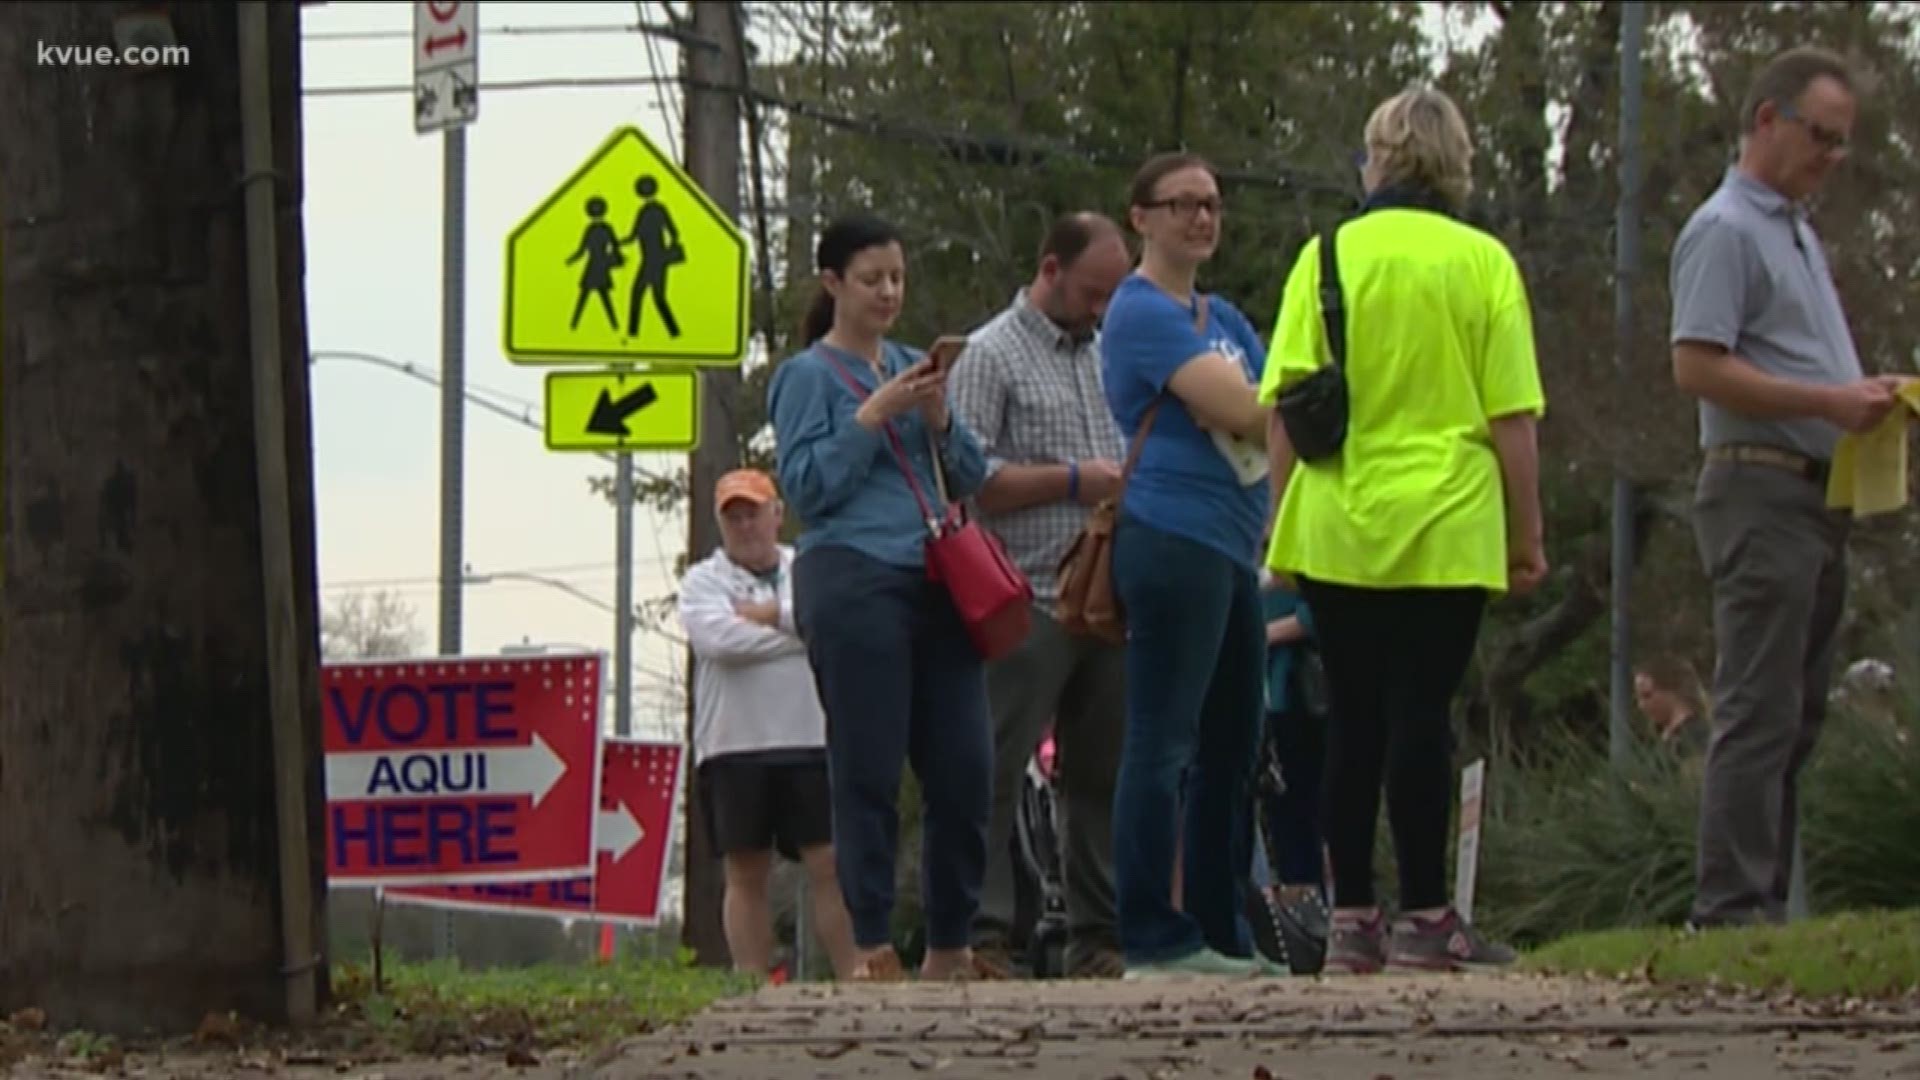 Travis County elections officials say many poll workers were no-shows as some of them worried about the coronavirus.